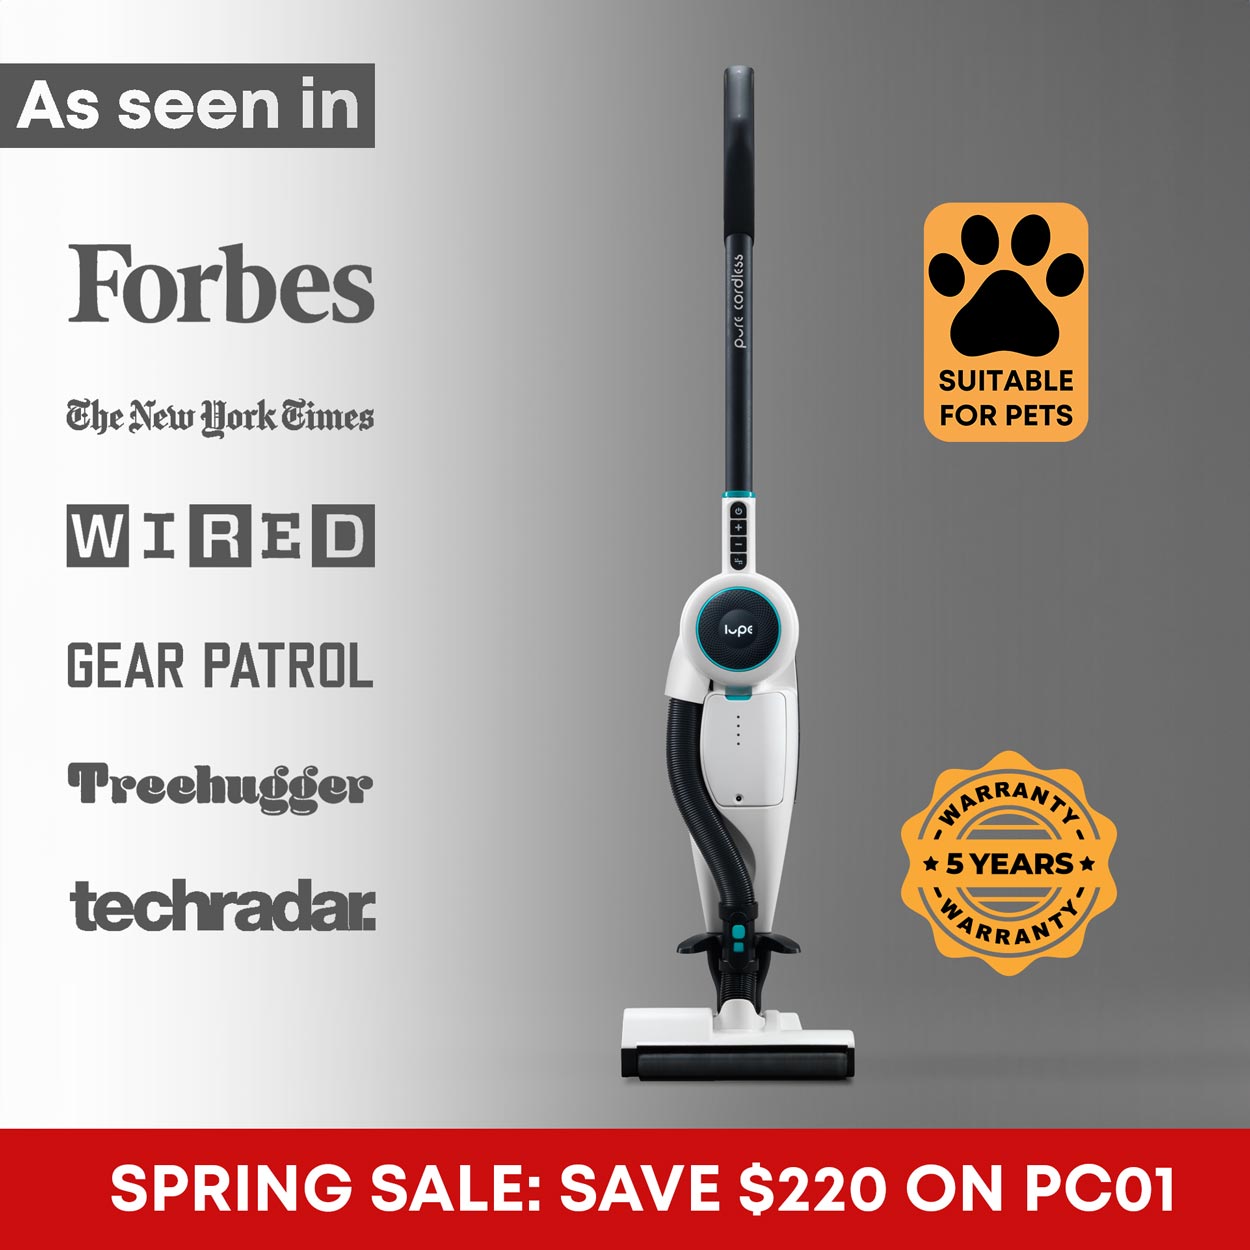 lupe® pure cordless vacuum cleaner